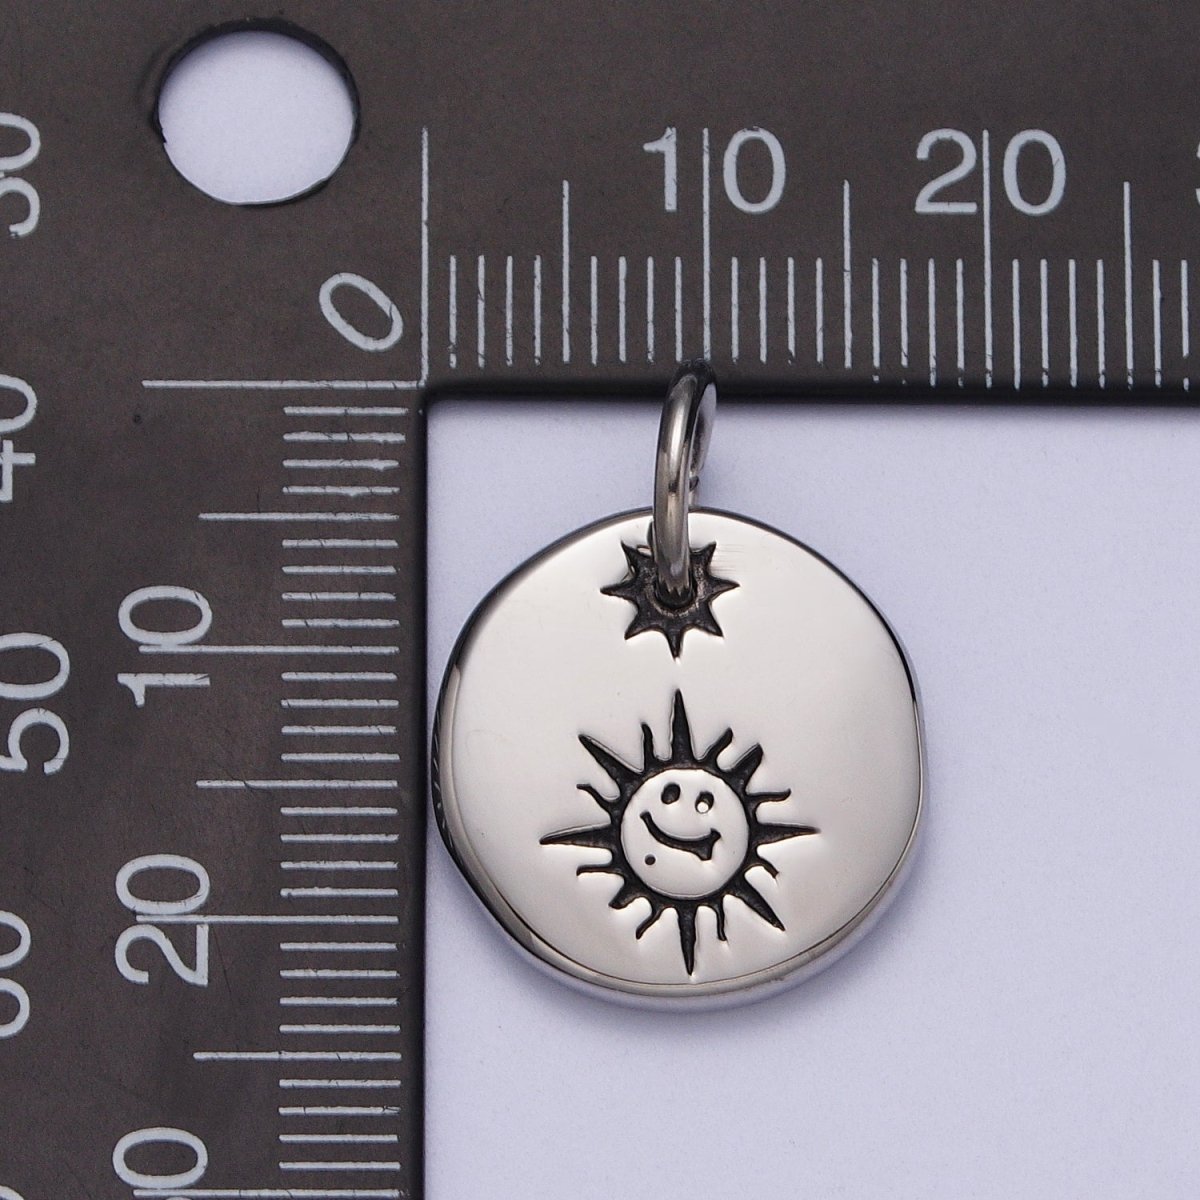 Stainless Steel Celestial Smiley Face Sunshine Star Round Charm P-615 - DLUXCA